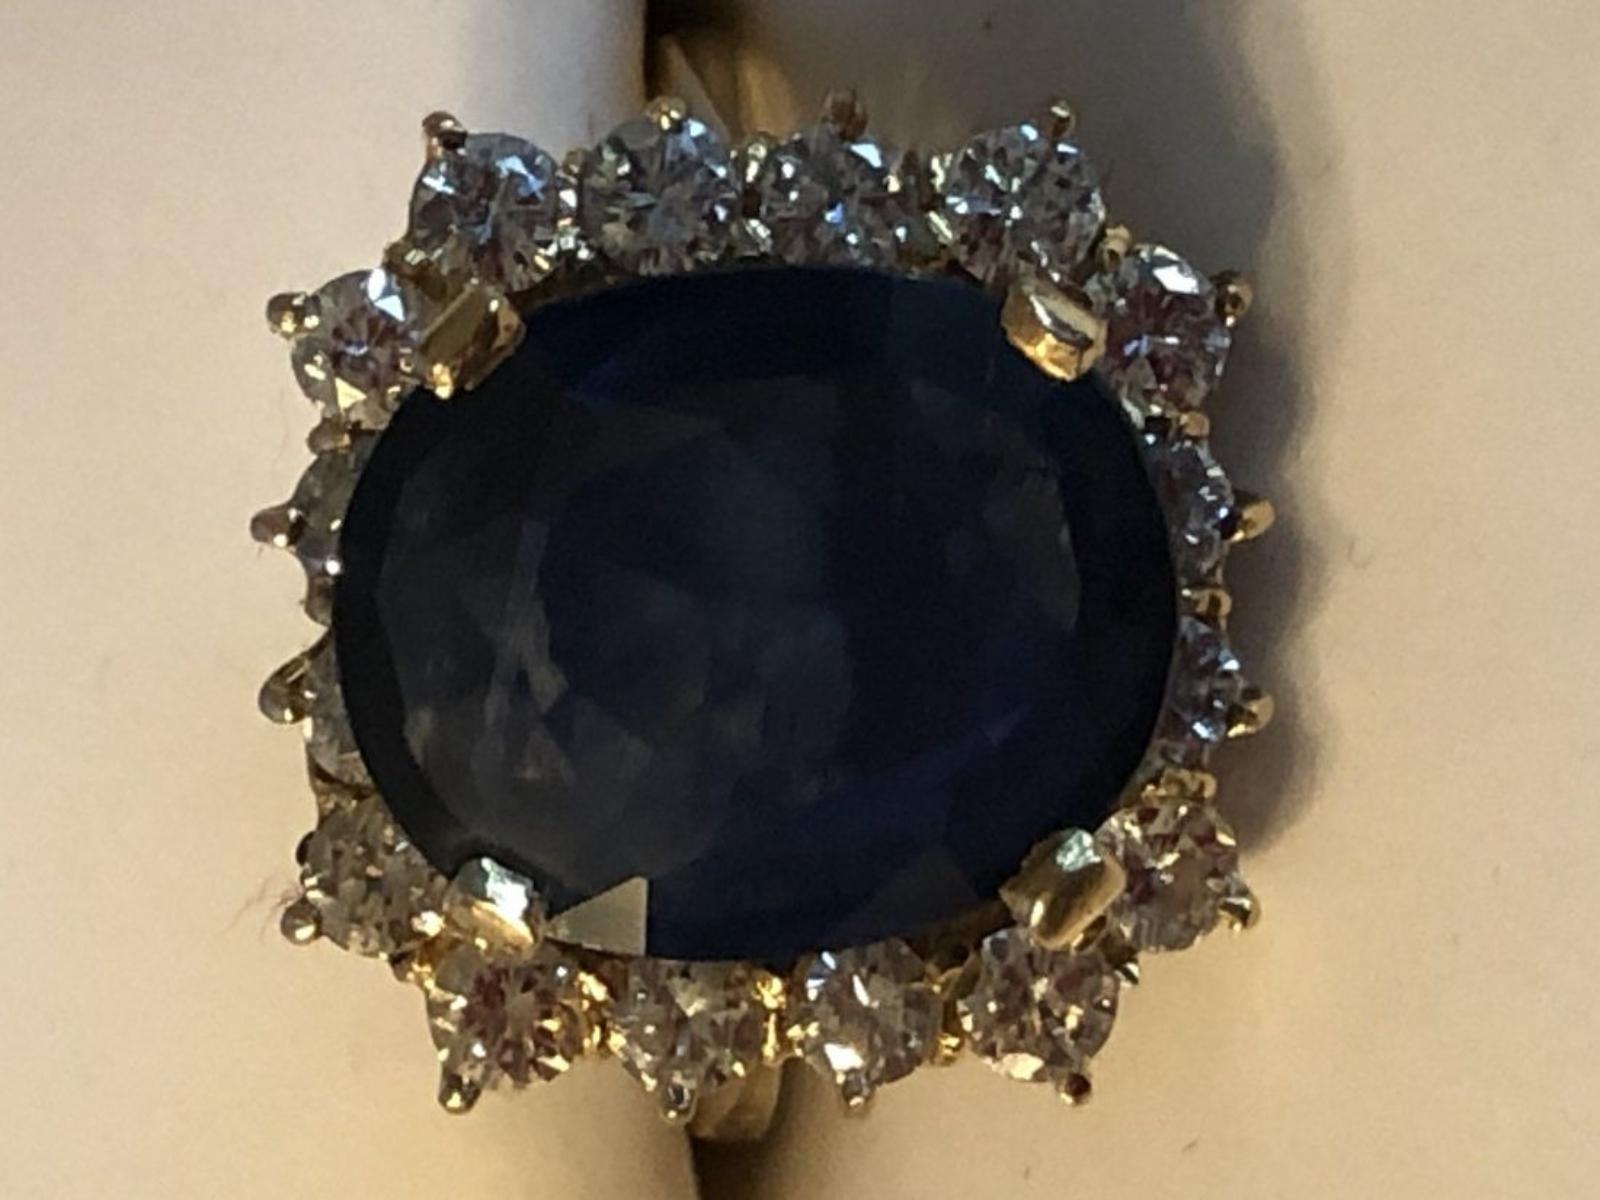 Impressive 14K Yellow Gold with an oval cut Sapphire weighing approximately 8 carats. Prong set with 16 Diamonds weighing approximately 0.08 CTW. Ring size is 7.25. Total weight is 6.8 grams.